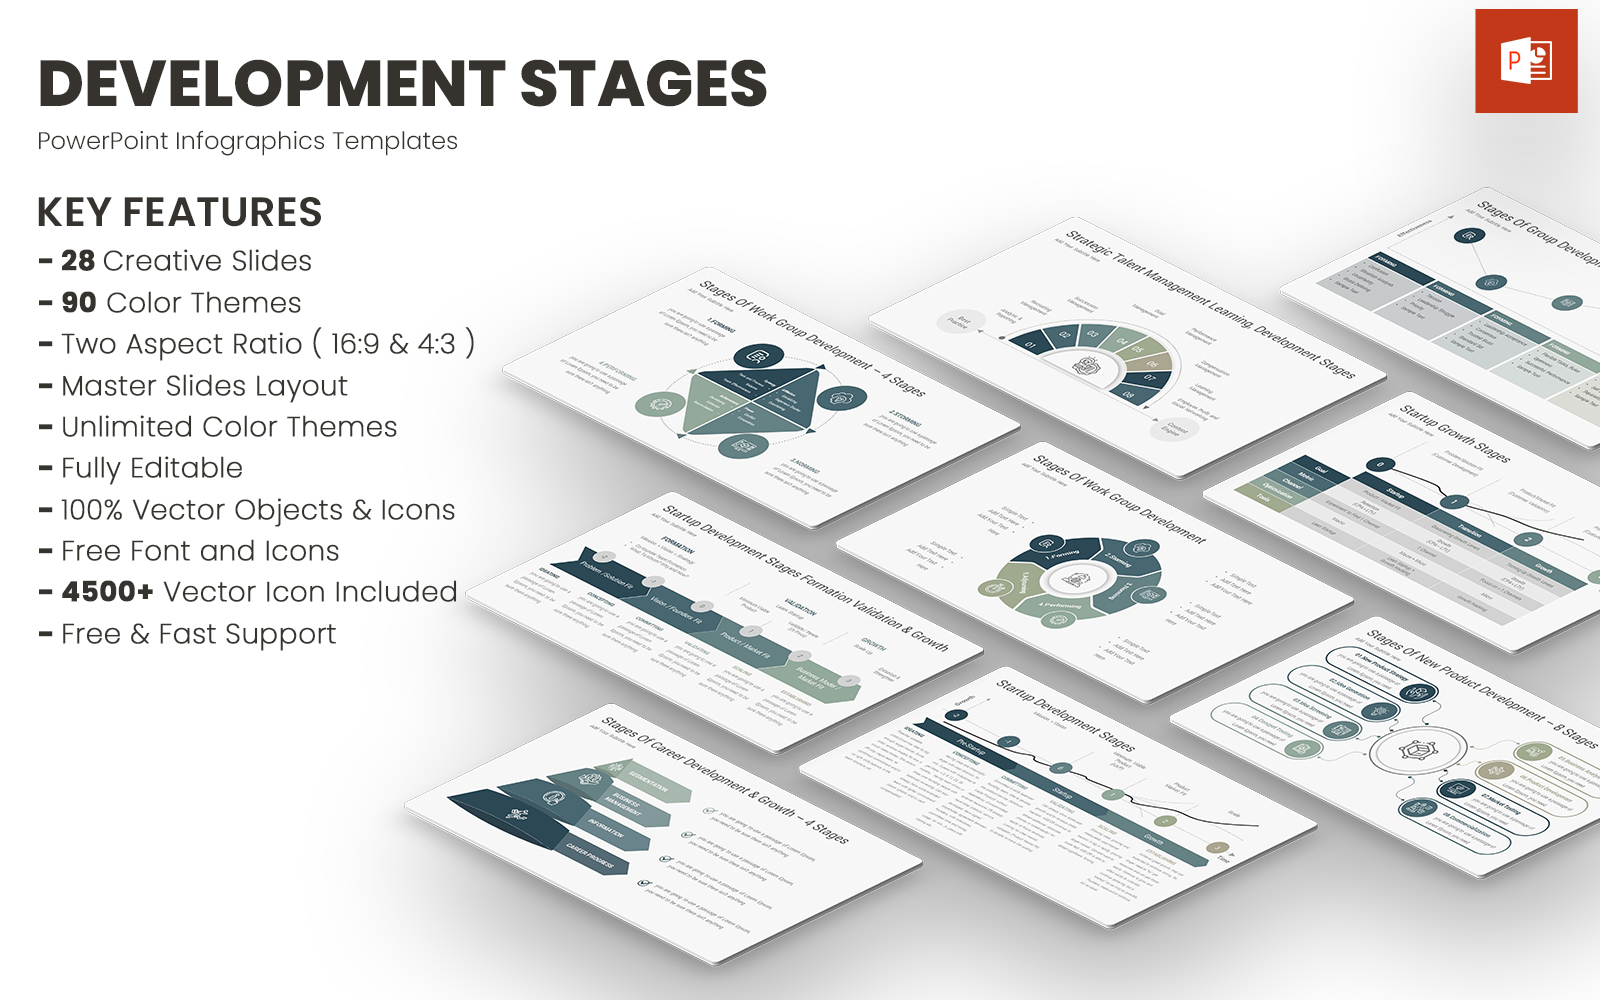 Development Stages PowerPoint Templates